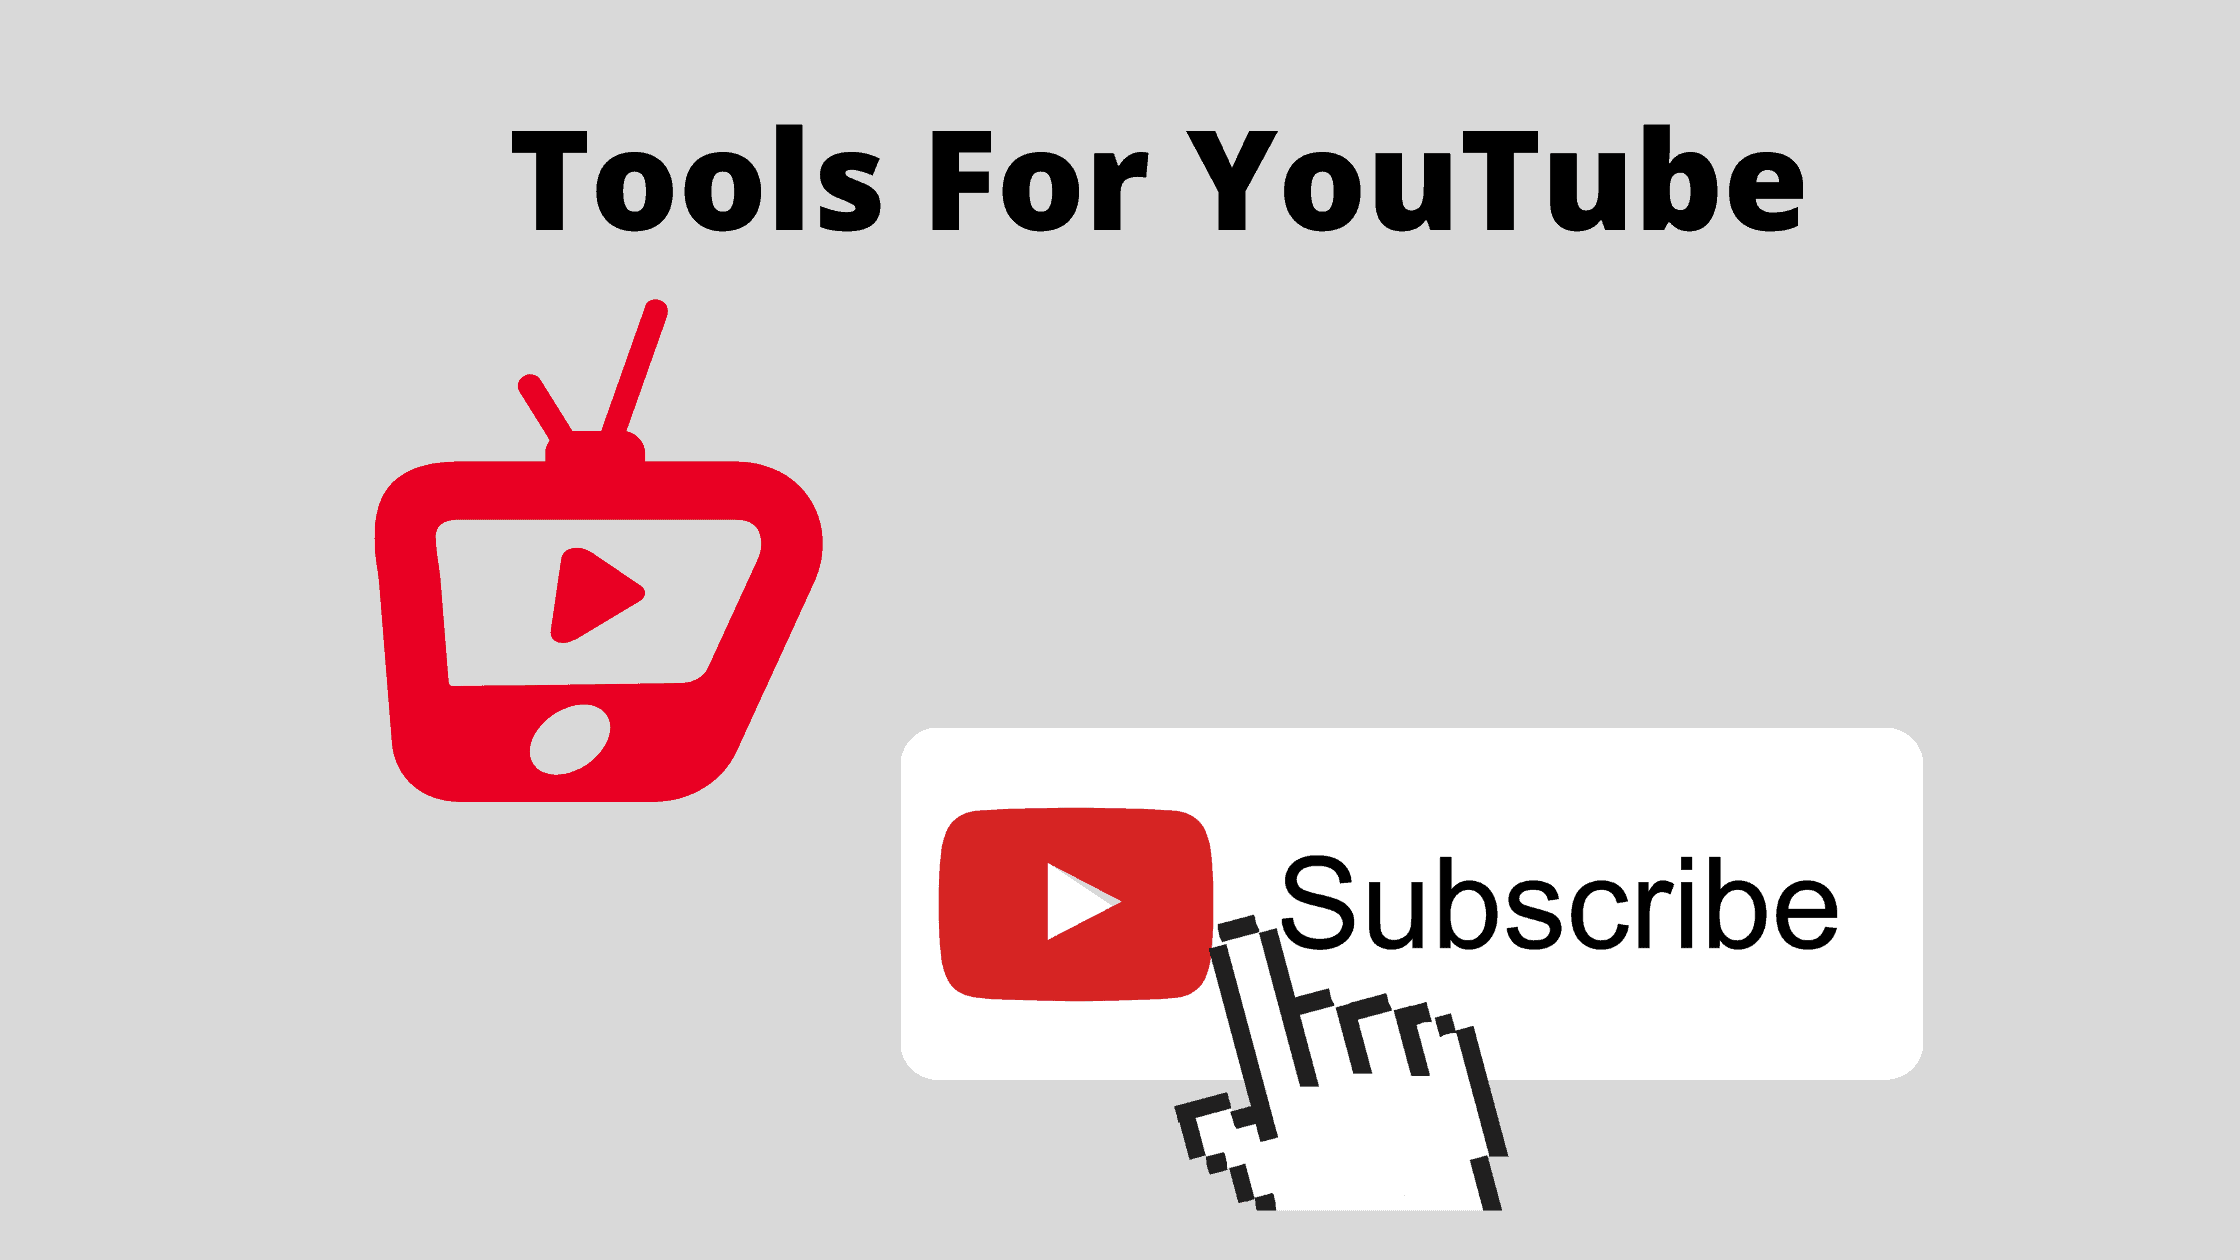 Tools For YouTube